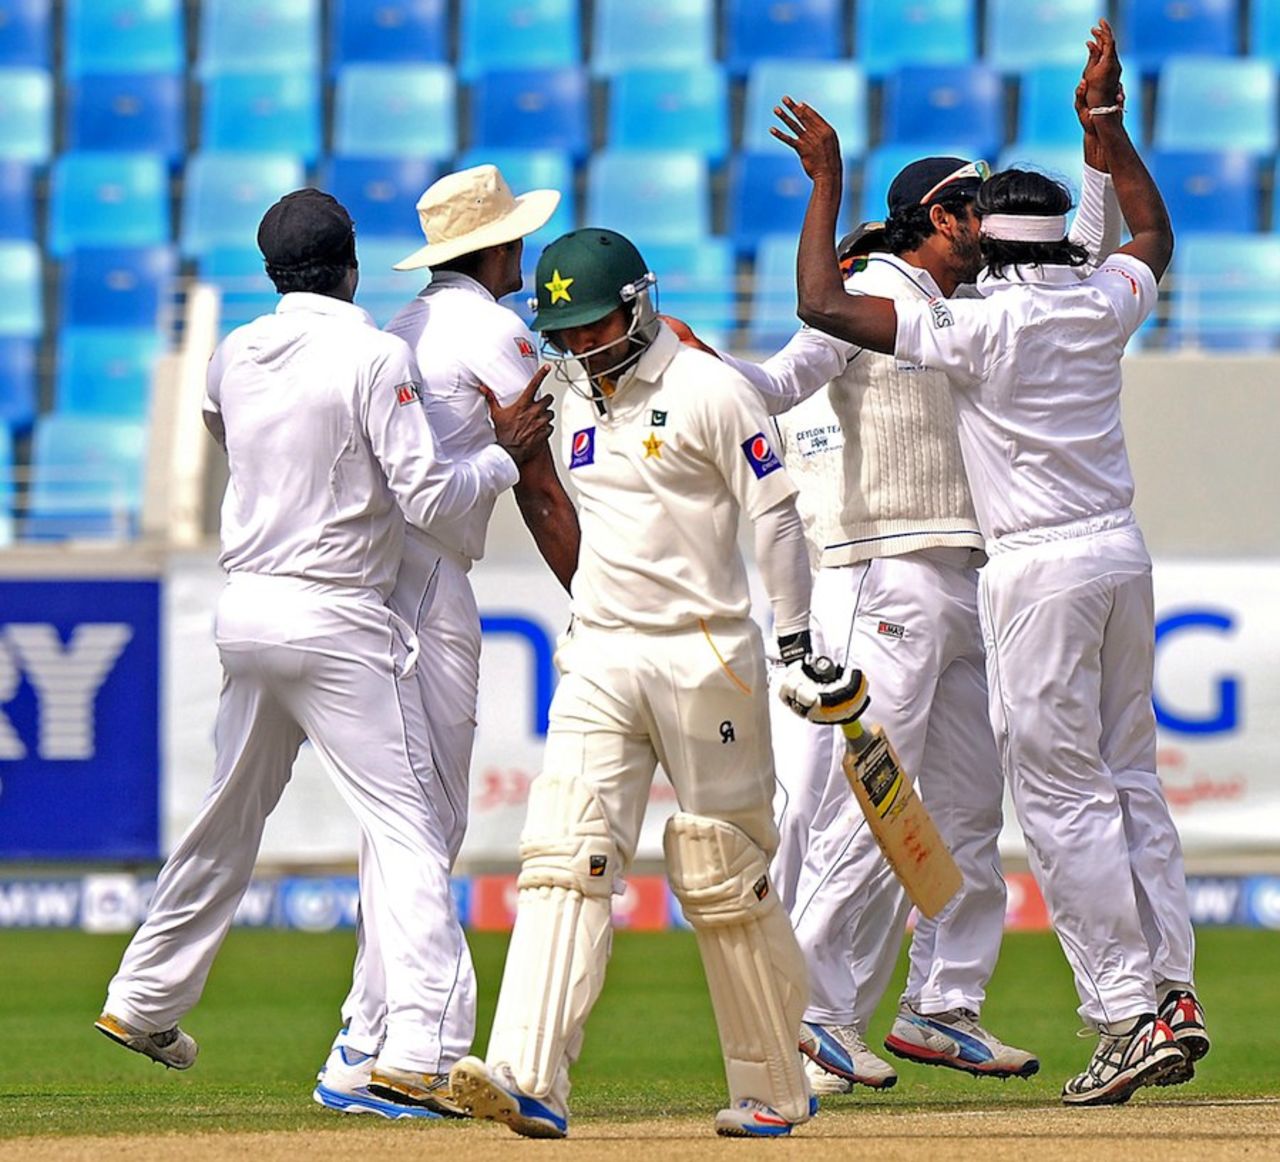 Mohammad Hafeez was dismissed early in the second session, Pakistan v Sri Lanka, 2nd Test, Dubai, 3rd day, January 10, 2014